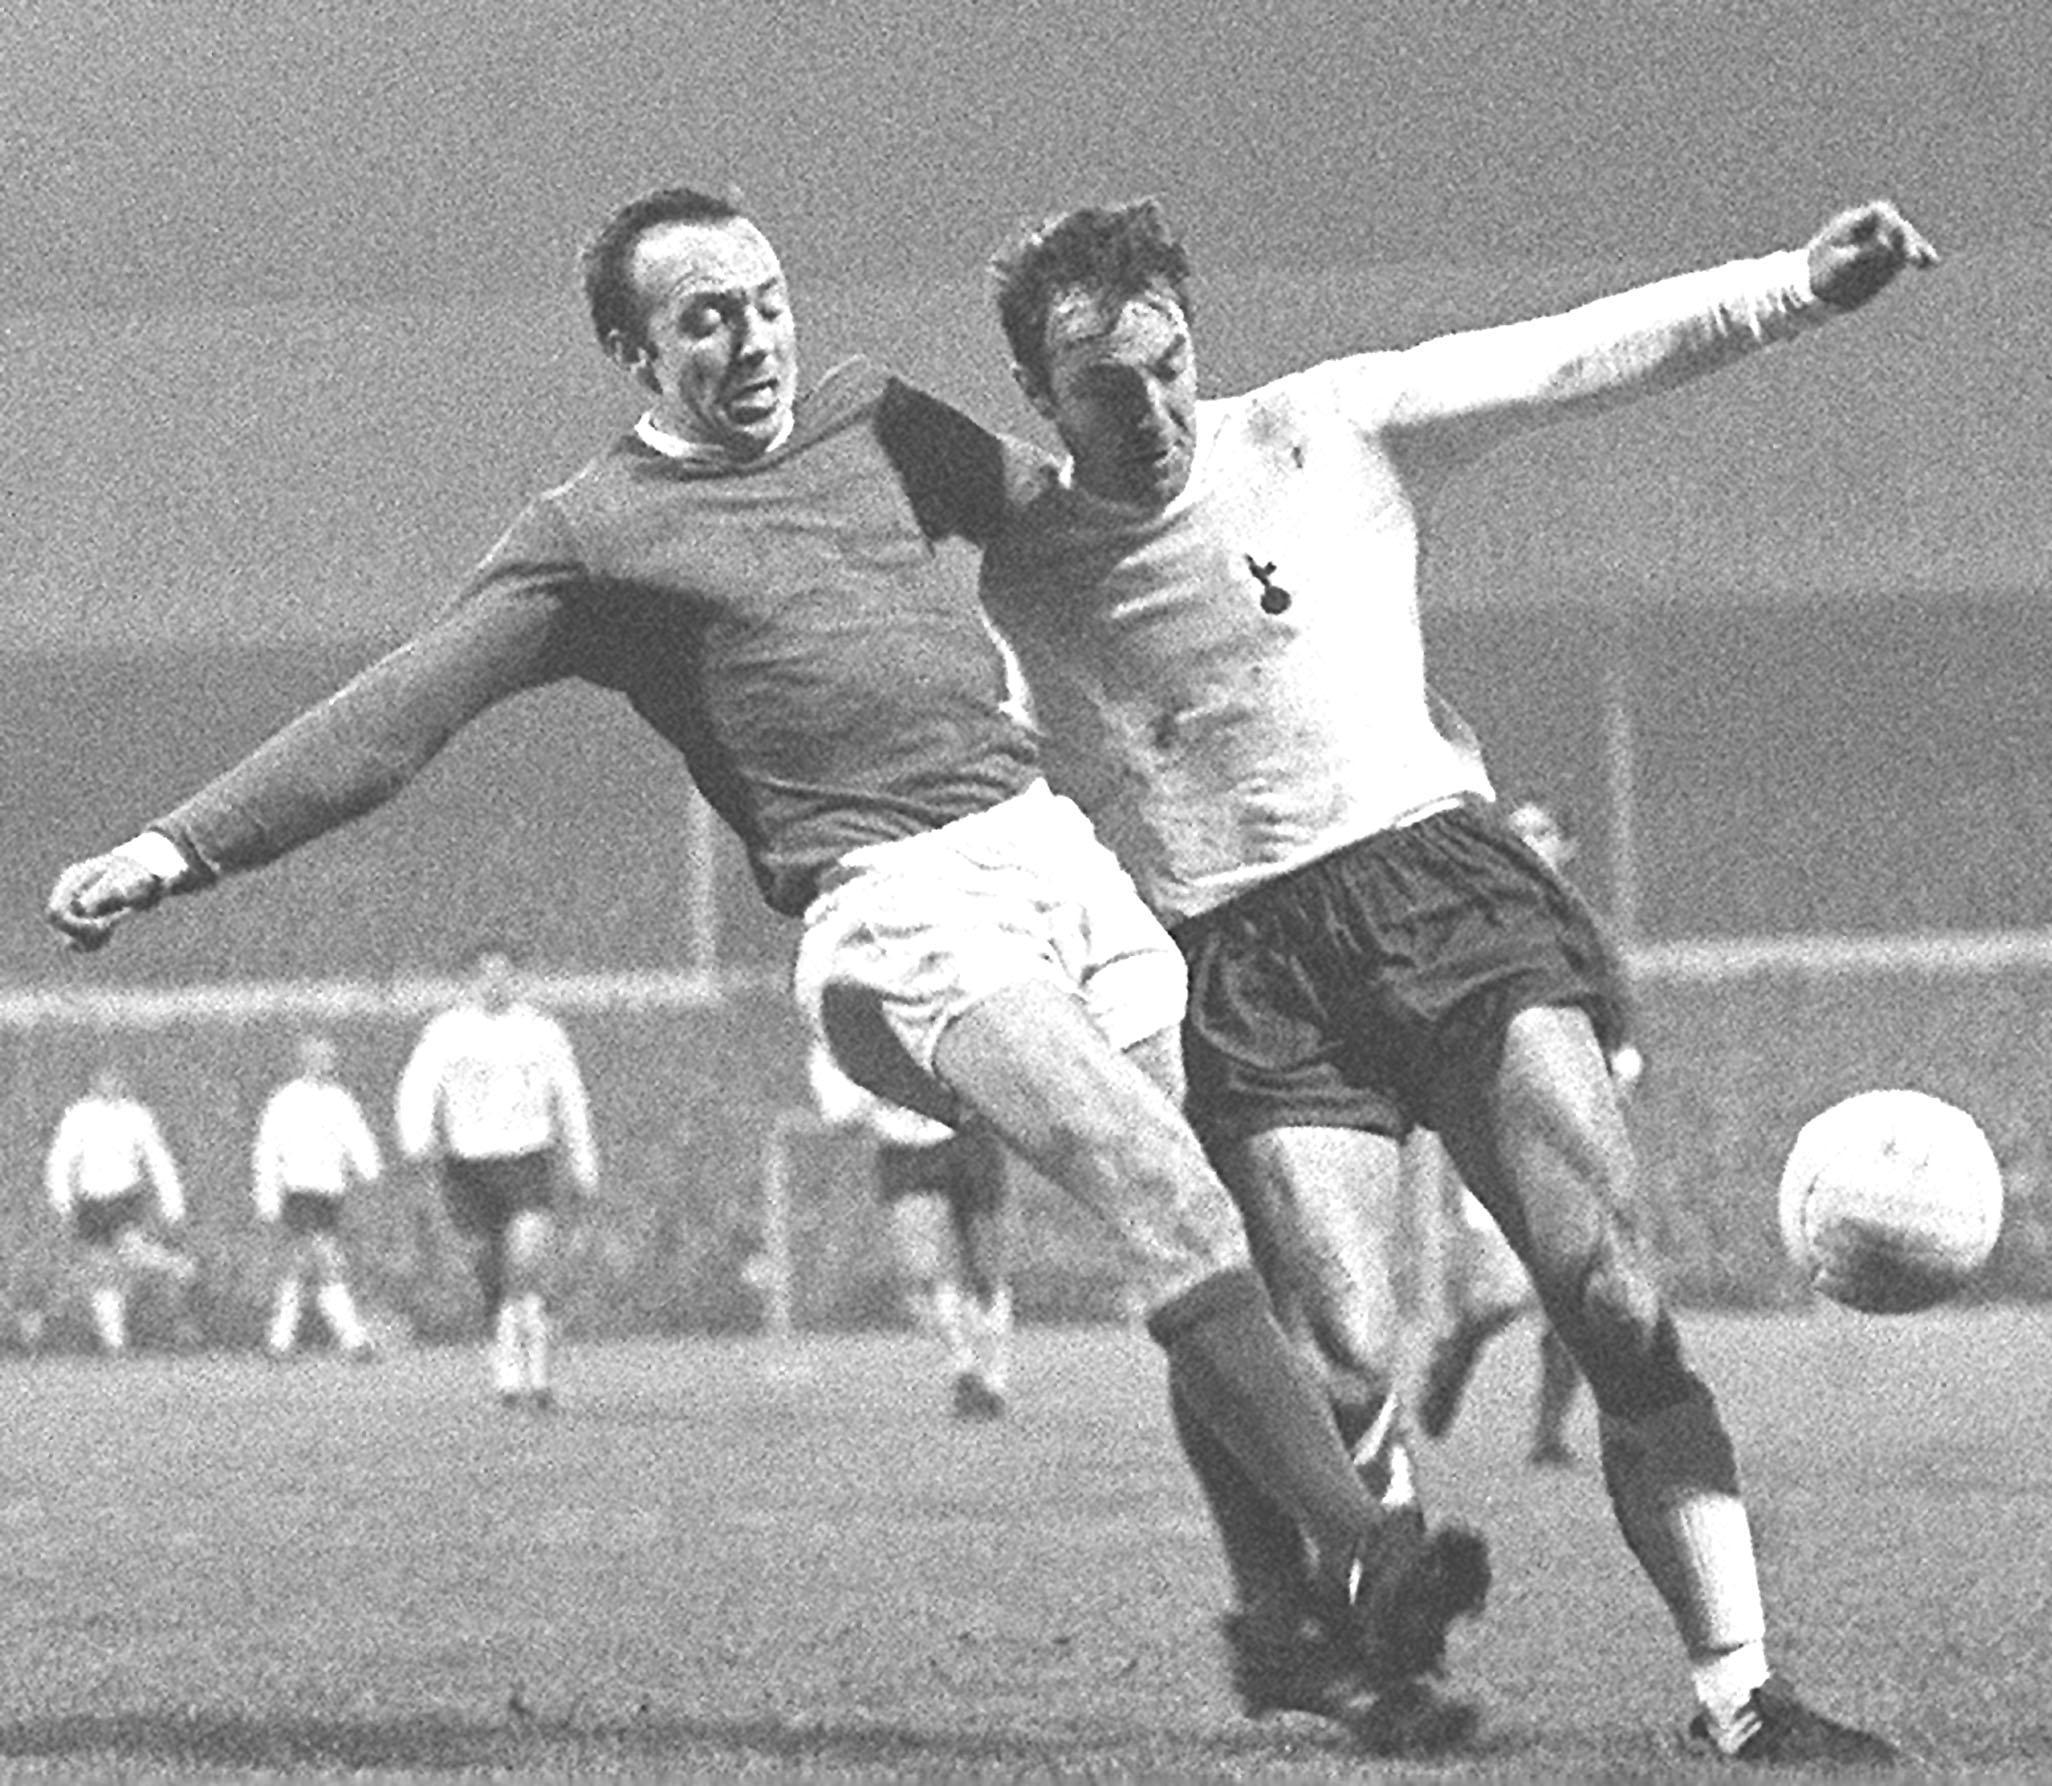 Manchester United's Nobby Stiles (left) and Tottenham Hotspur's Jimmy Greaves in a tussle for the ball during the First Division match at White Hart Lane, London.